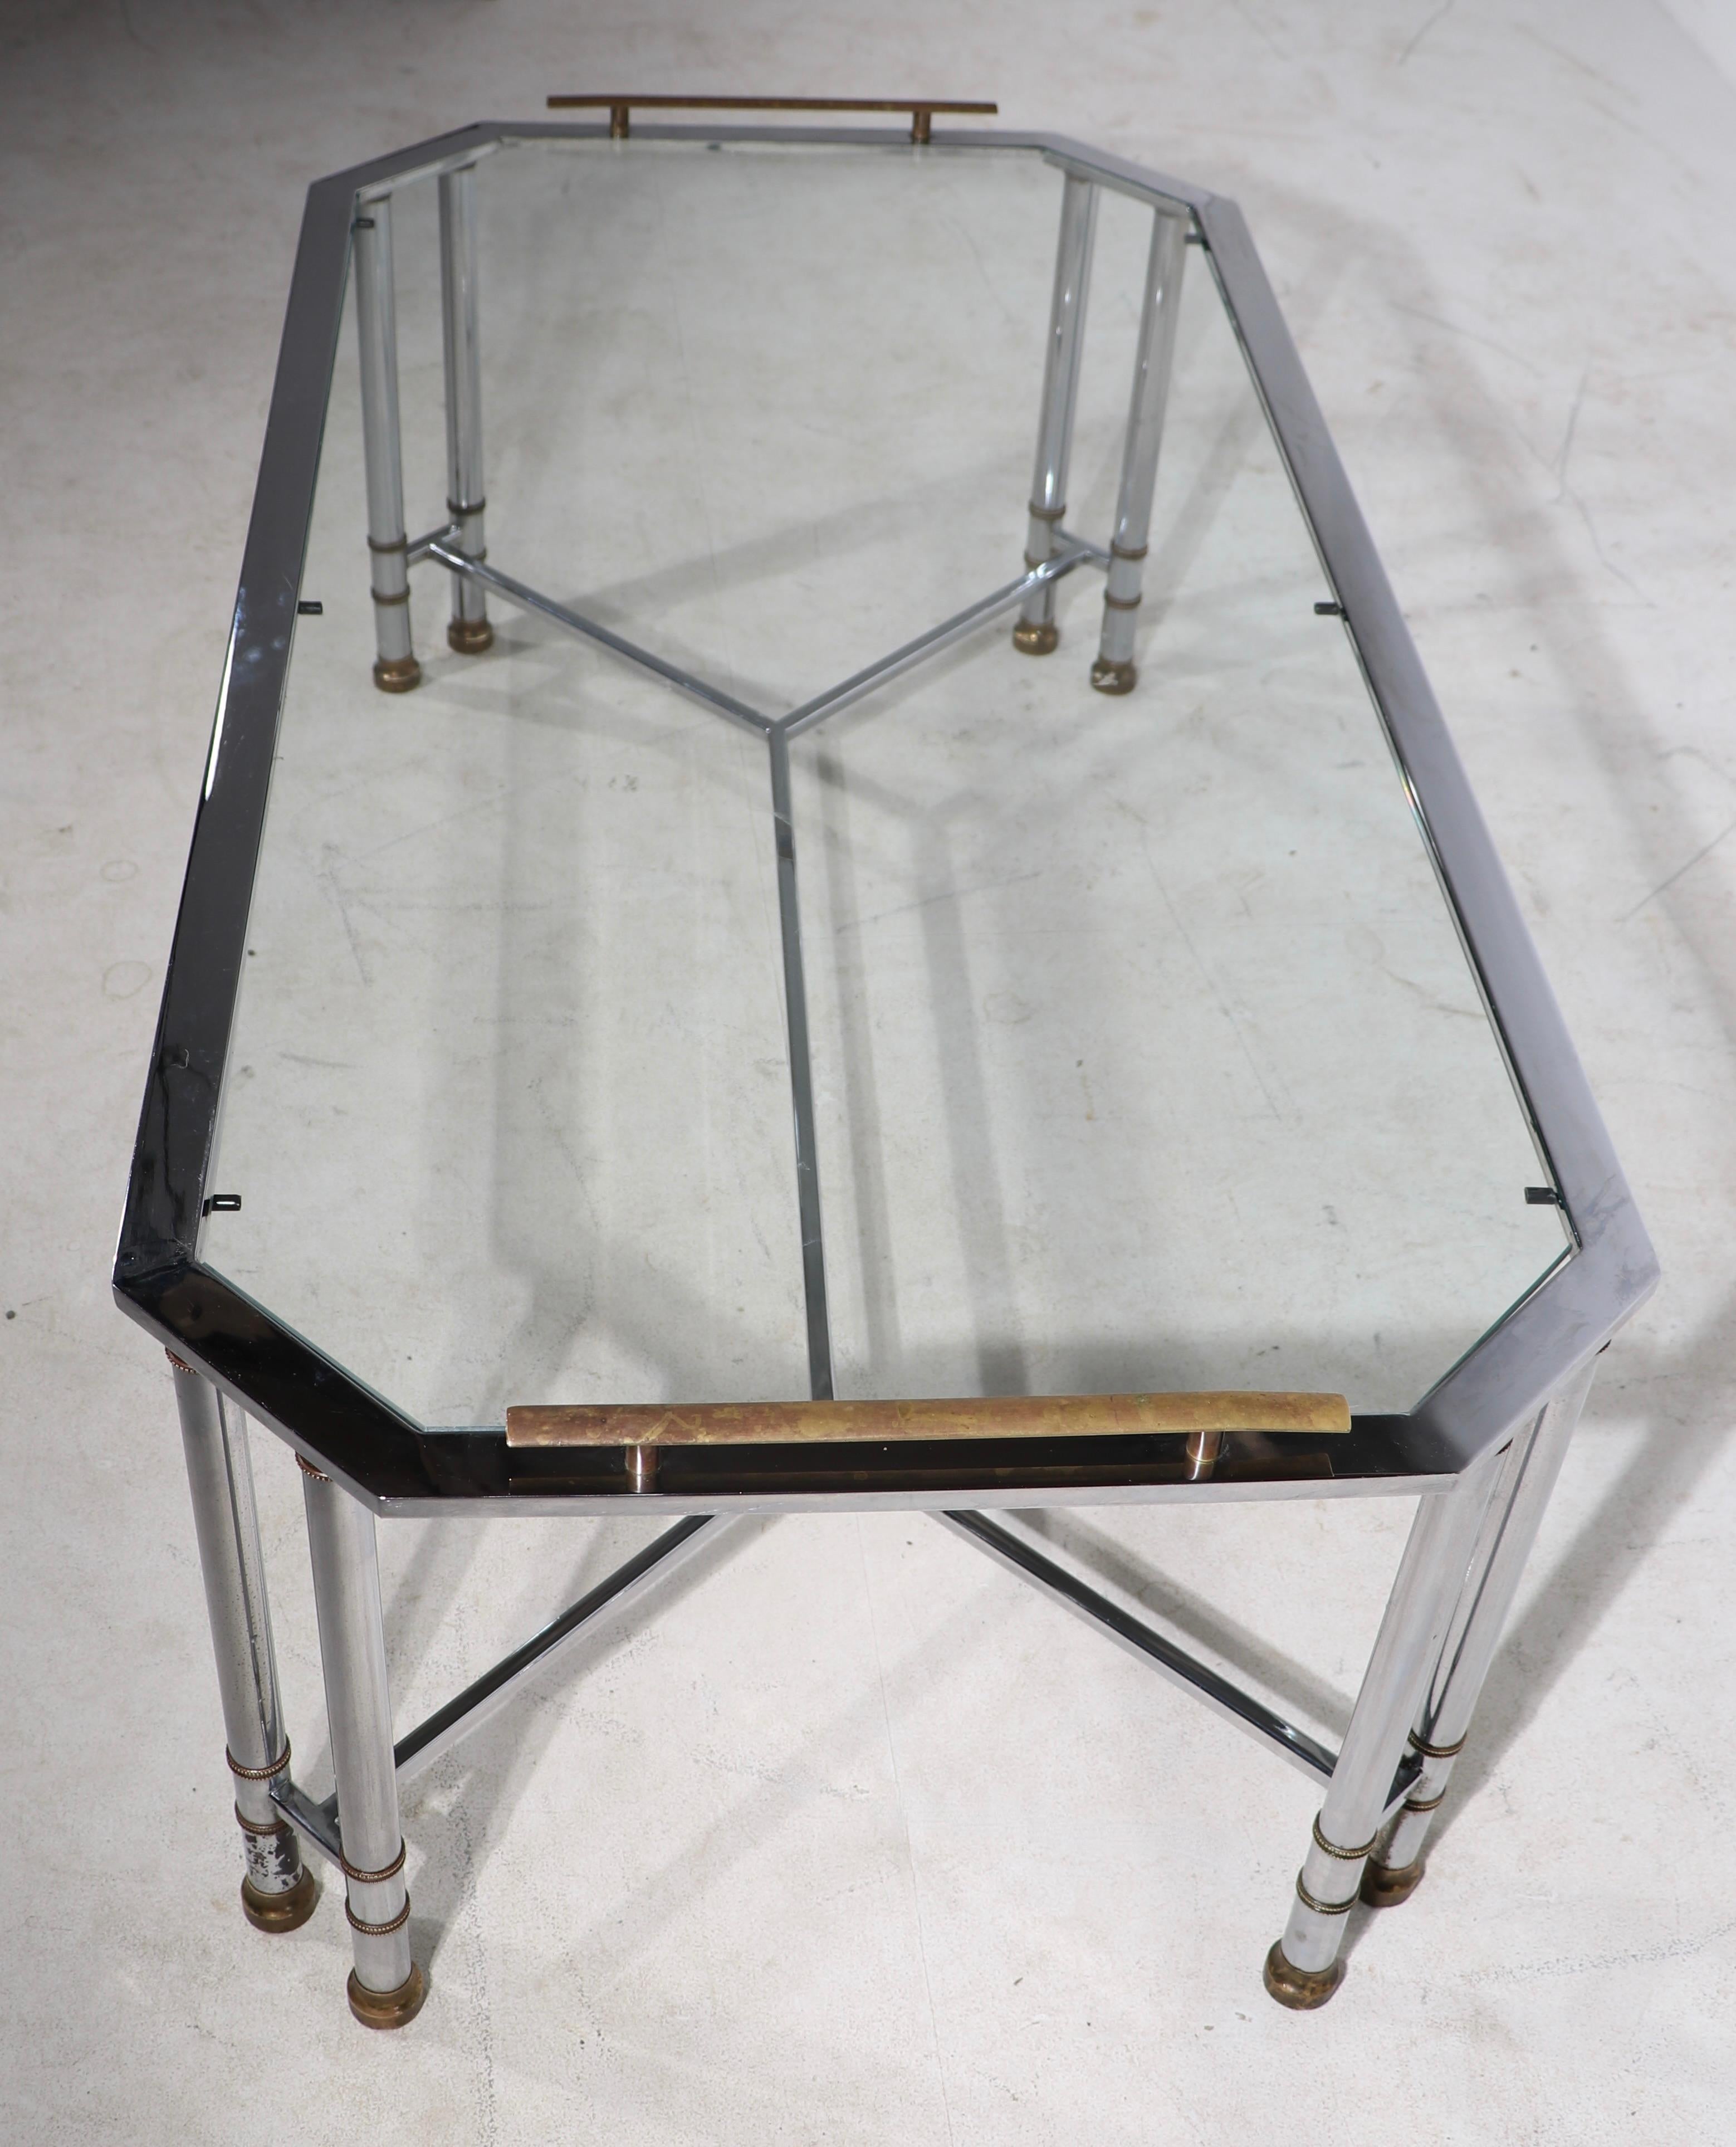 High style chrome, brass and glass coffee table, having a eight sided top, with decorative brass handles. The table surface is 15 in. x total H inc handles 17 in. The chrome frame shows minor cosmetic wear, notable on one foot ( see images ) and the